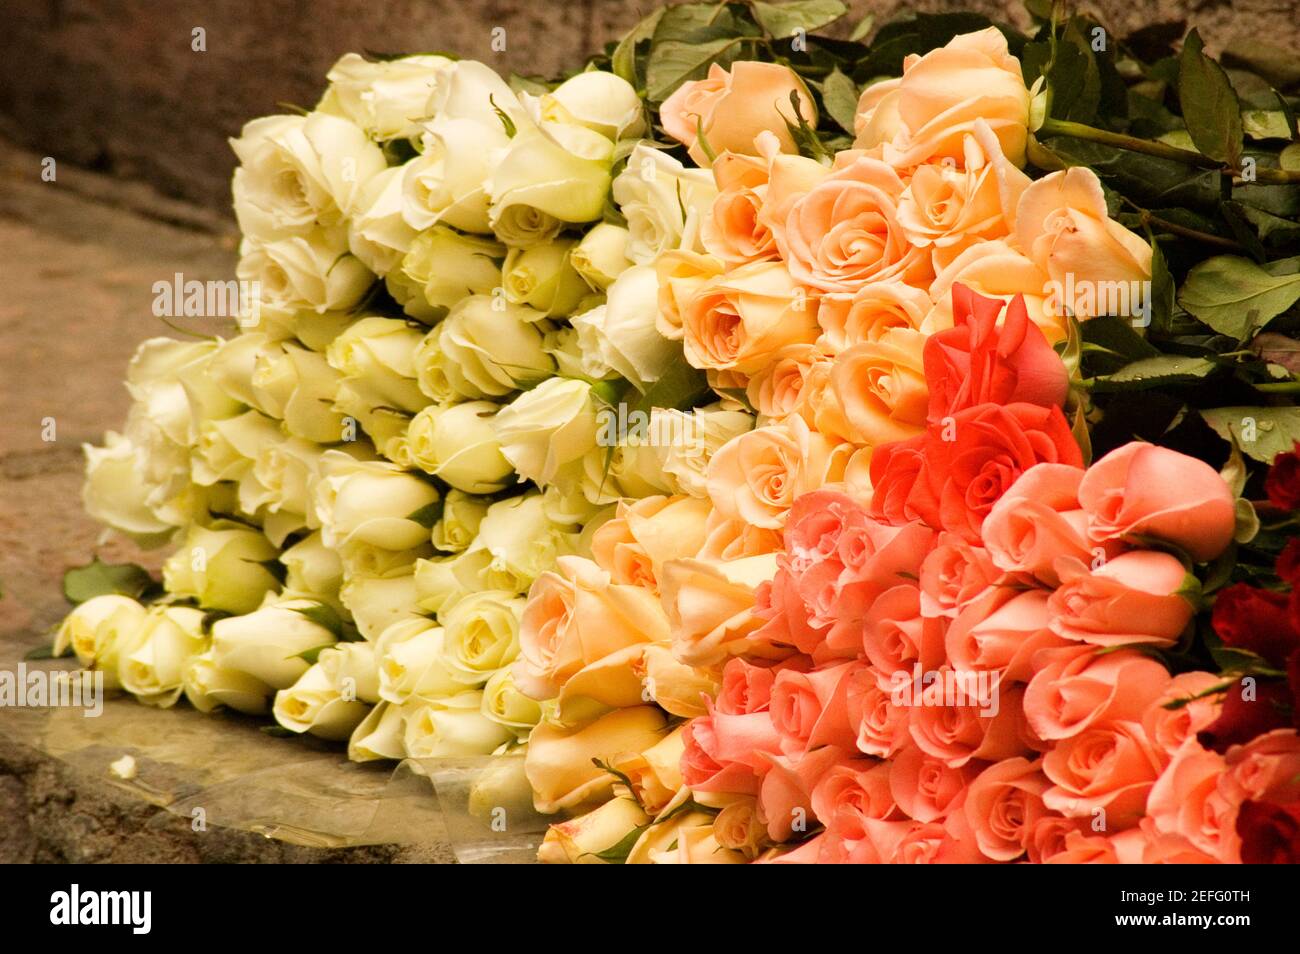 Close-up of a stack of roses Stock Photo